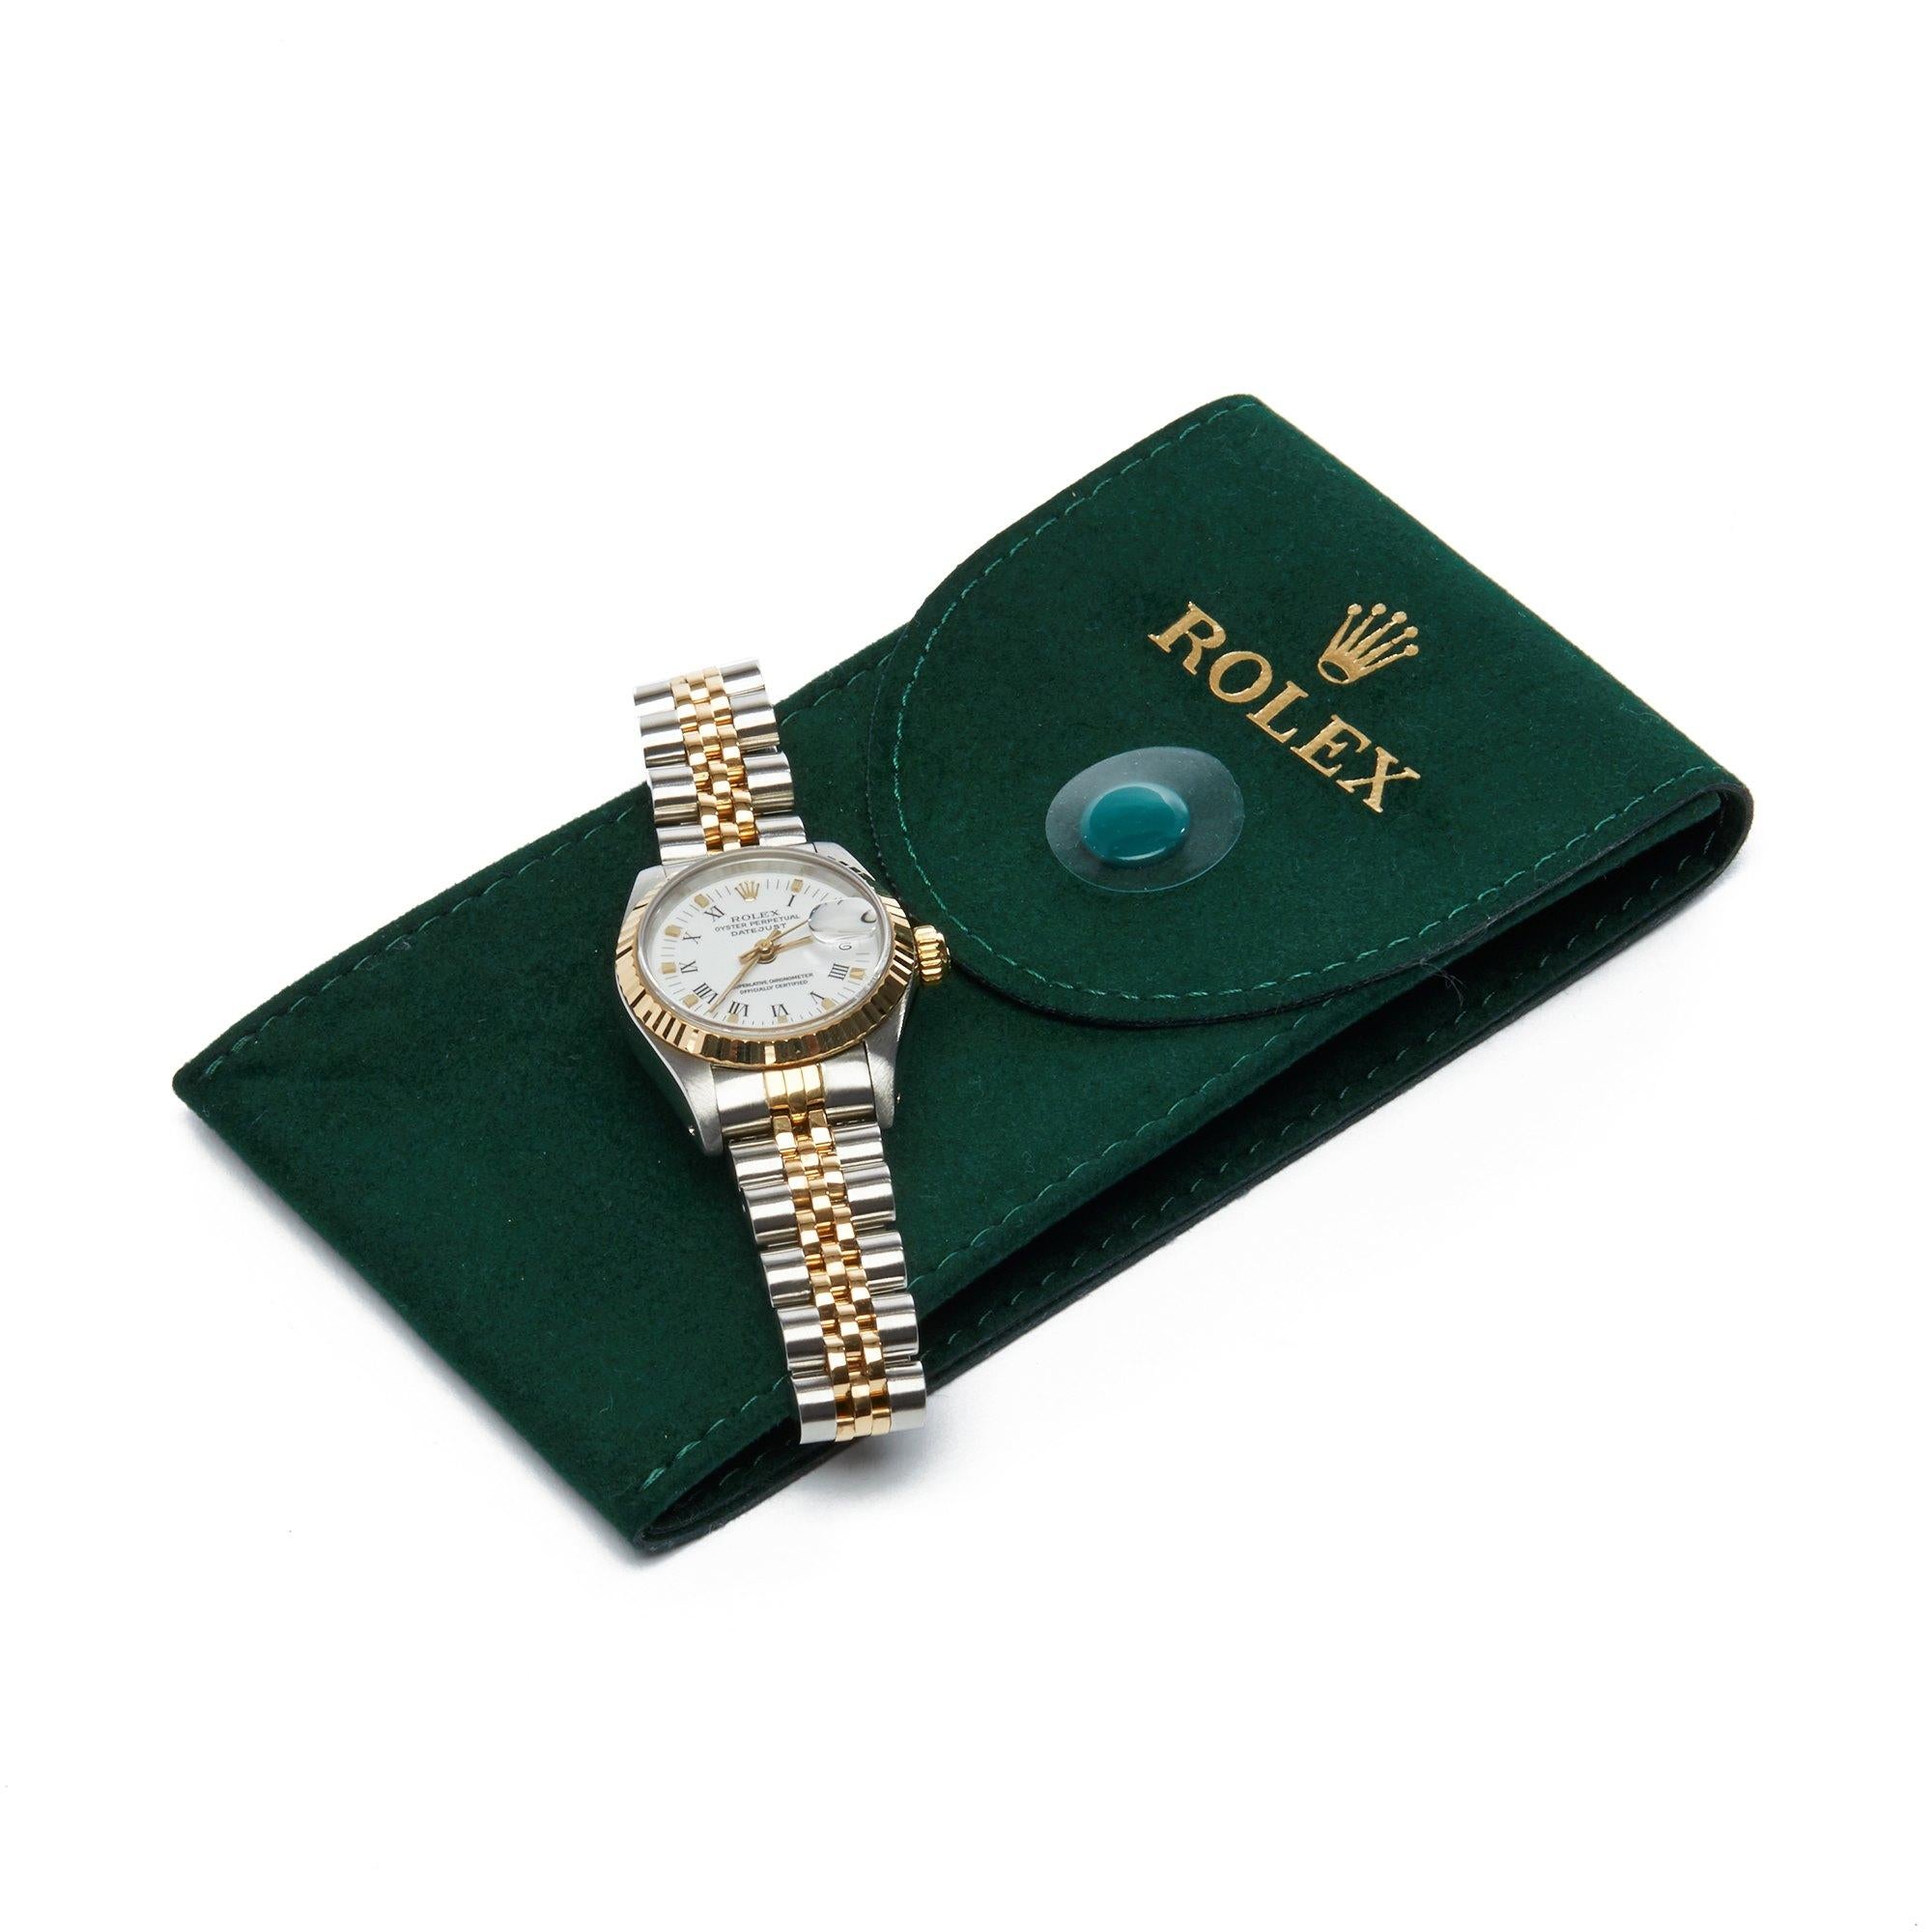 Rolex Datejust 26 69173 Ladies Stainless Steel and Yellow Gold Watch 4